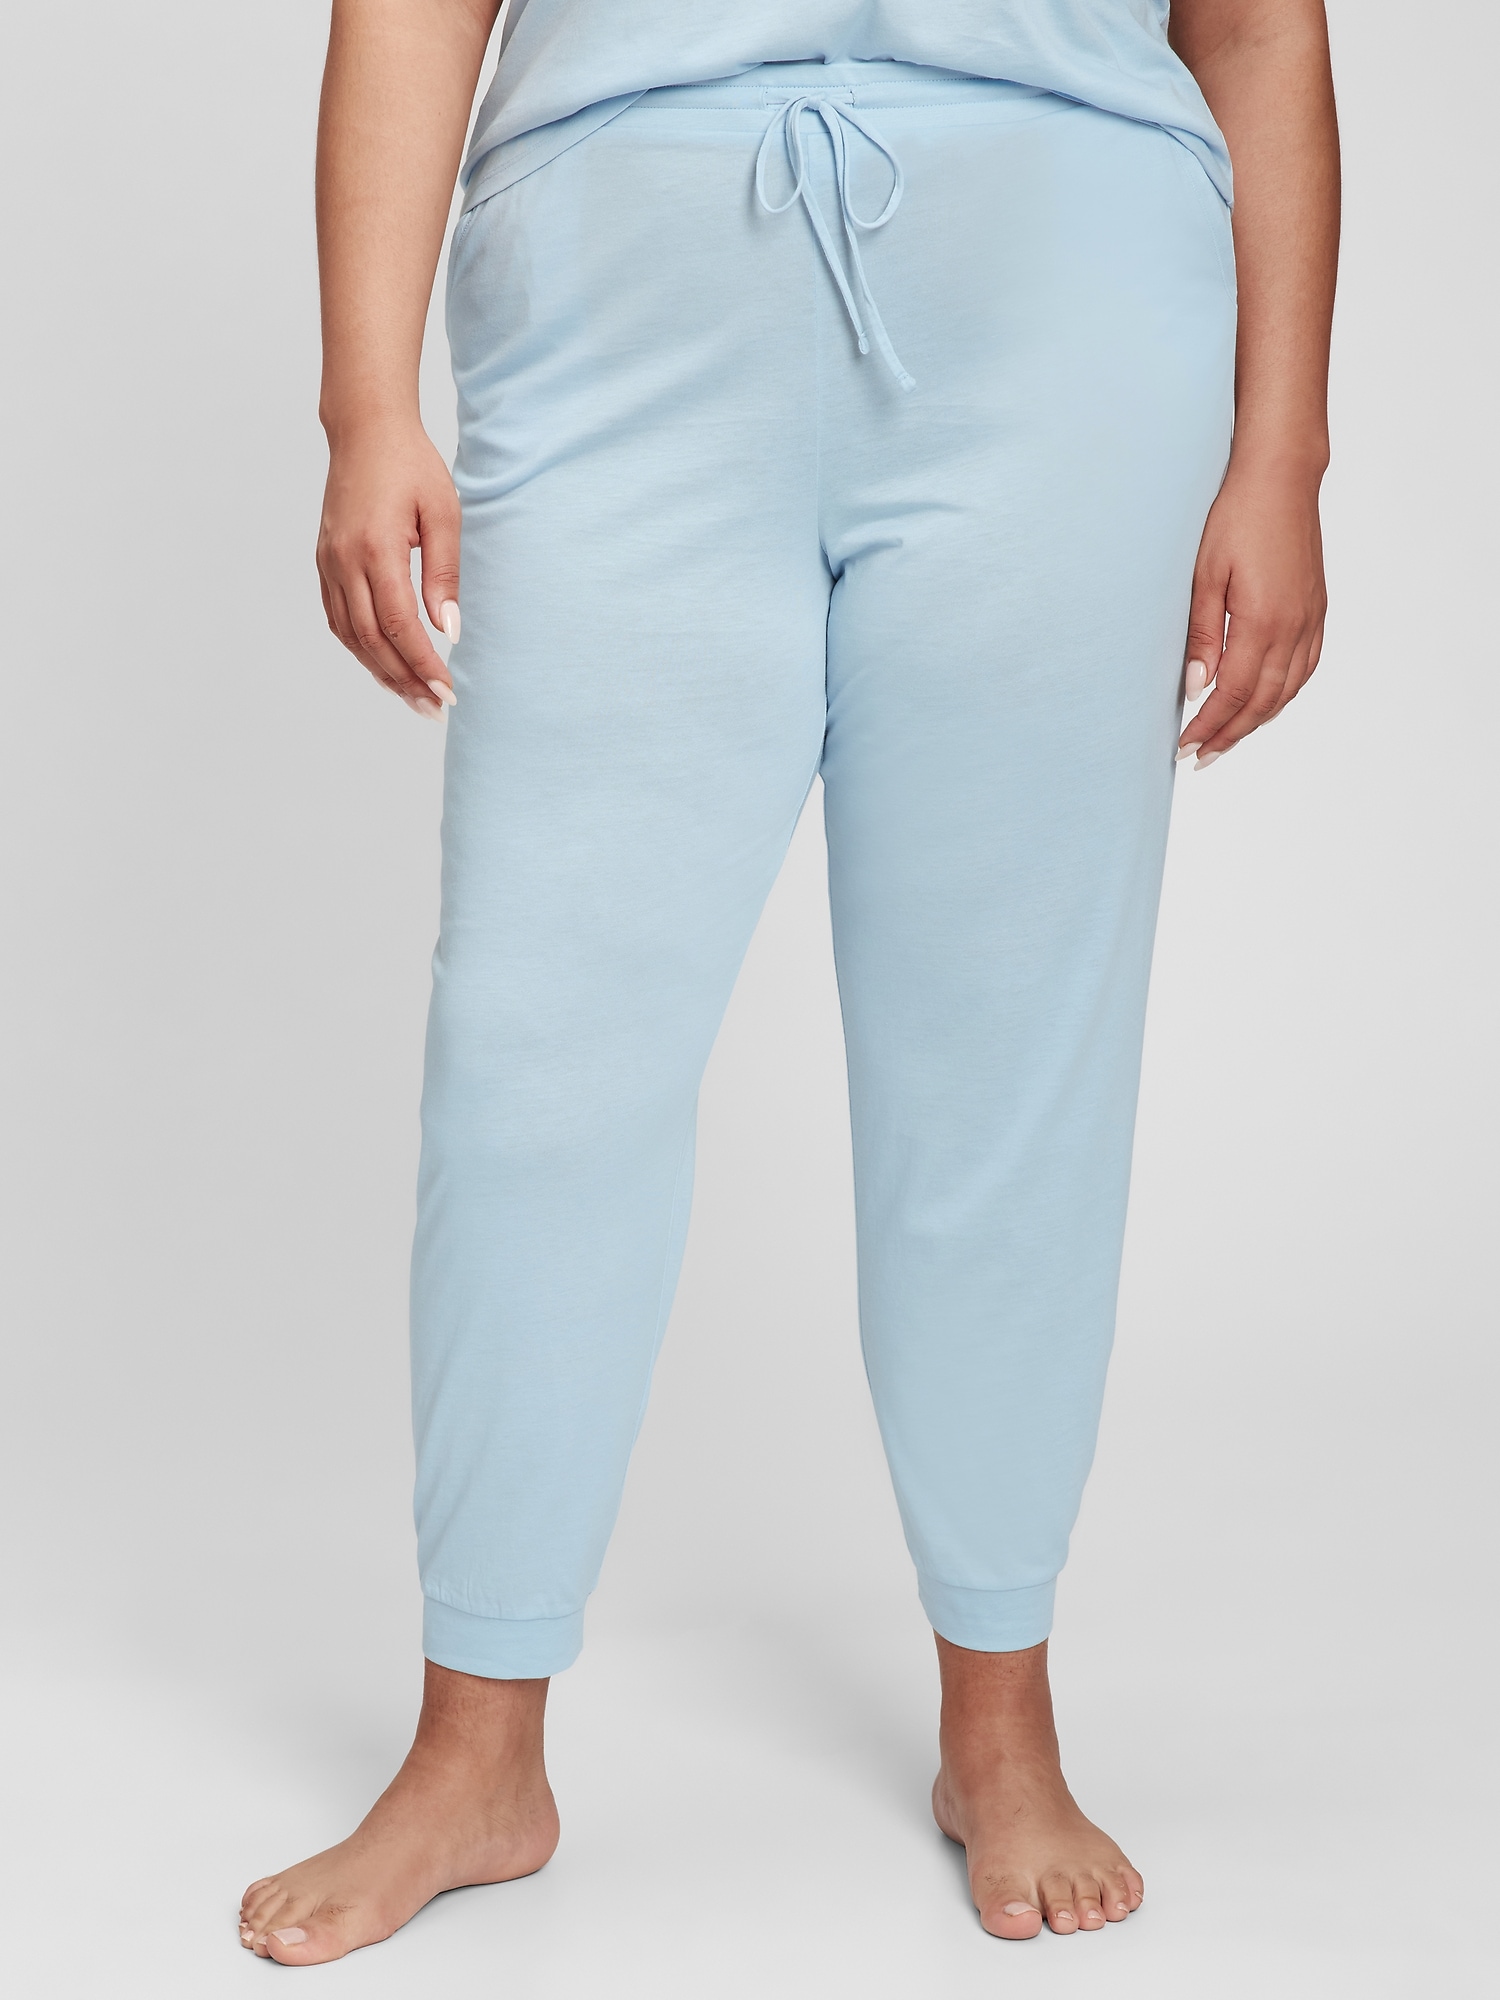 Stylish and Comfortable Women's Joggers